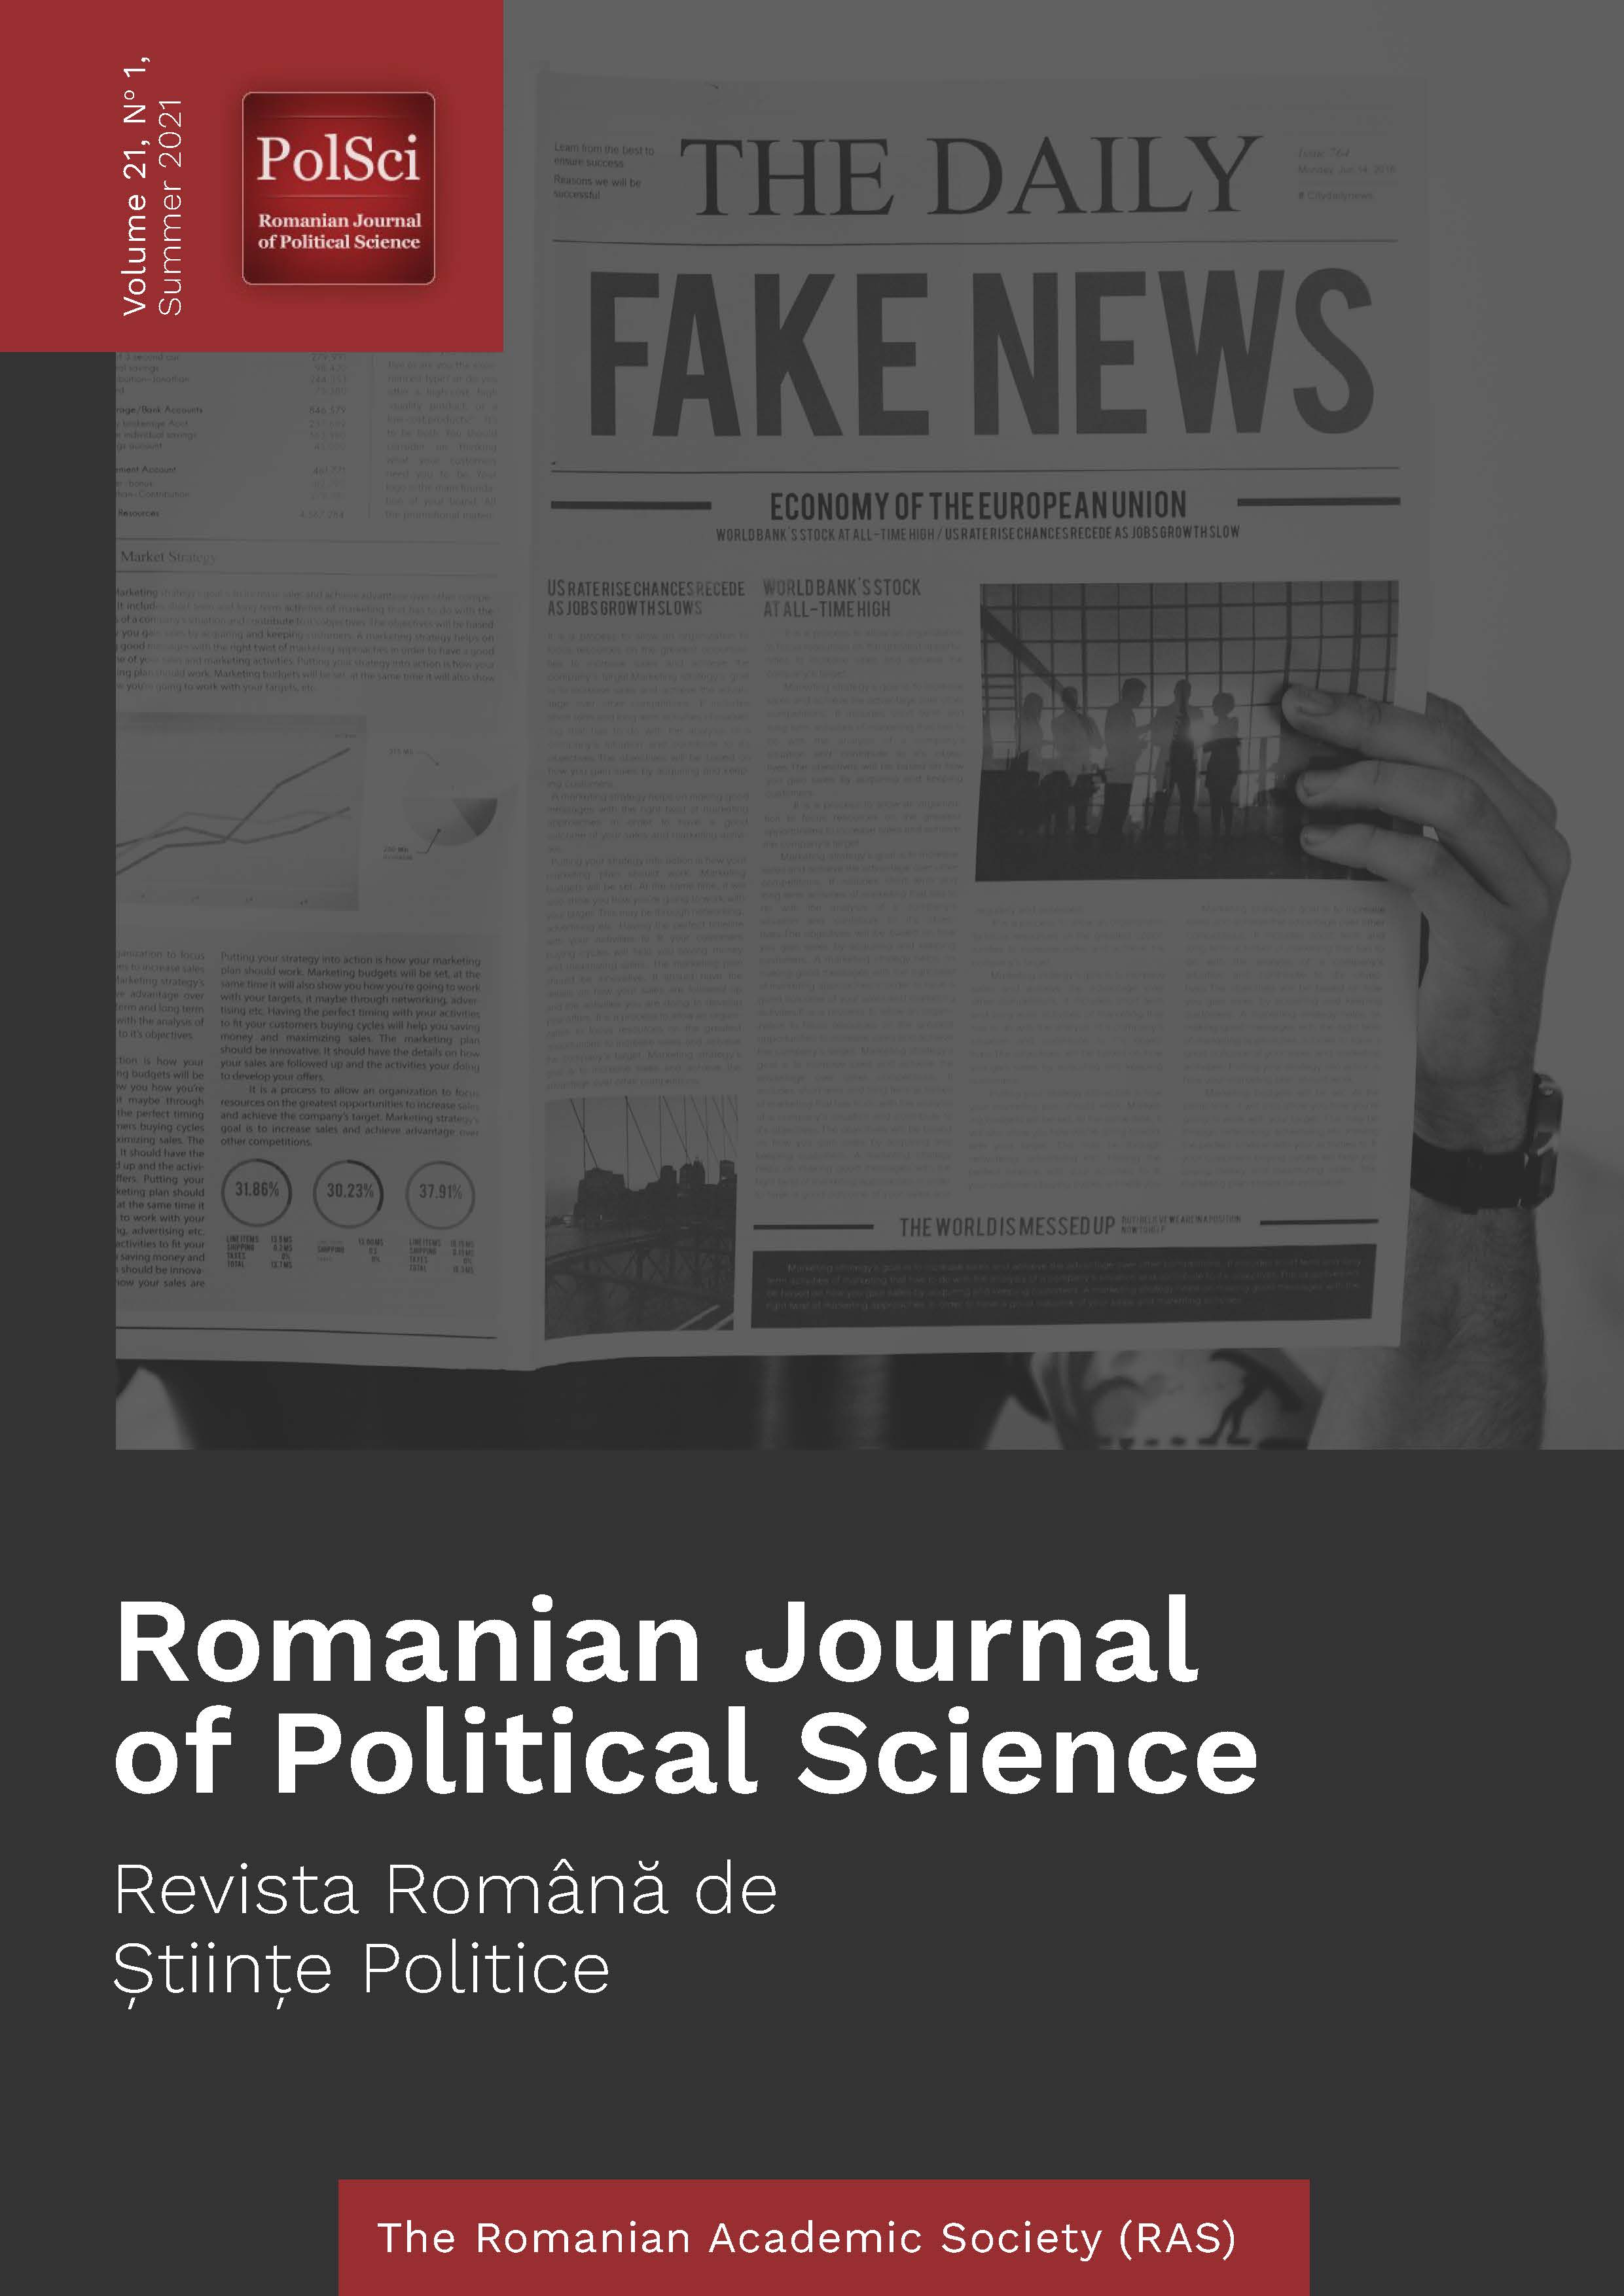 Content optimization in political communication: lessons from the fake news production sites in Veles, Macedonia